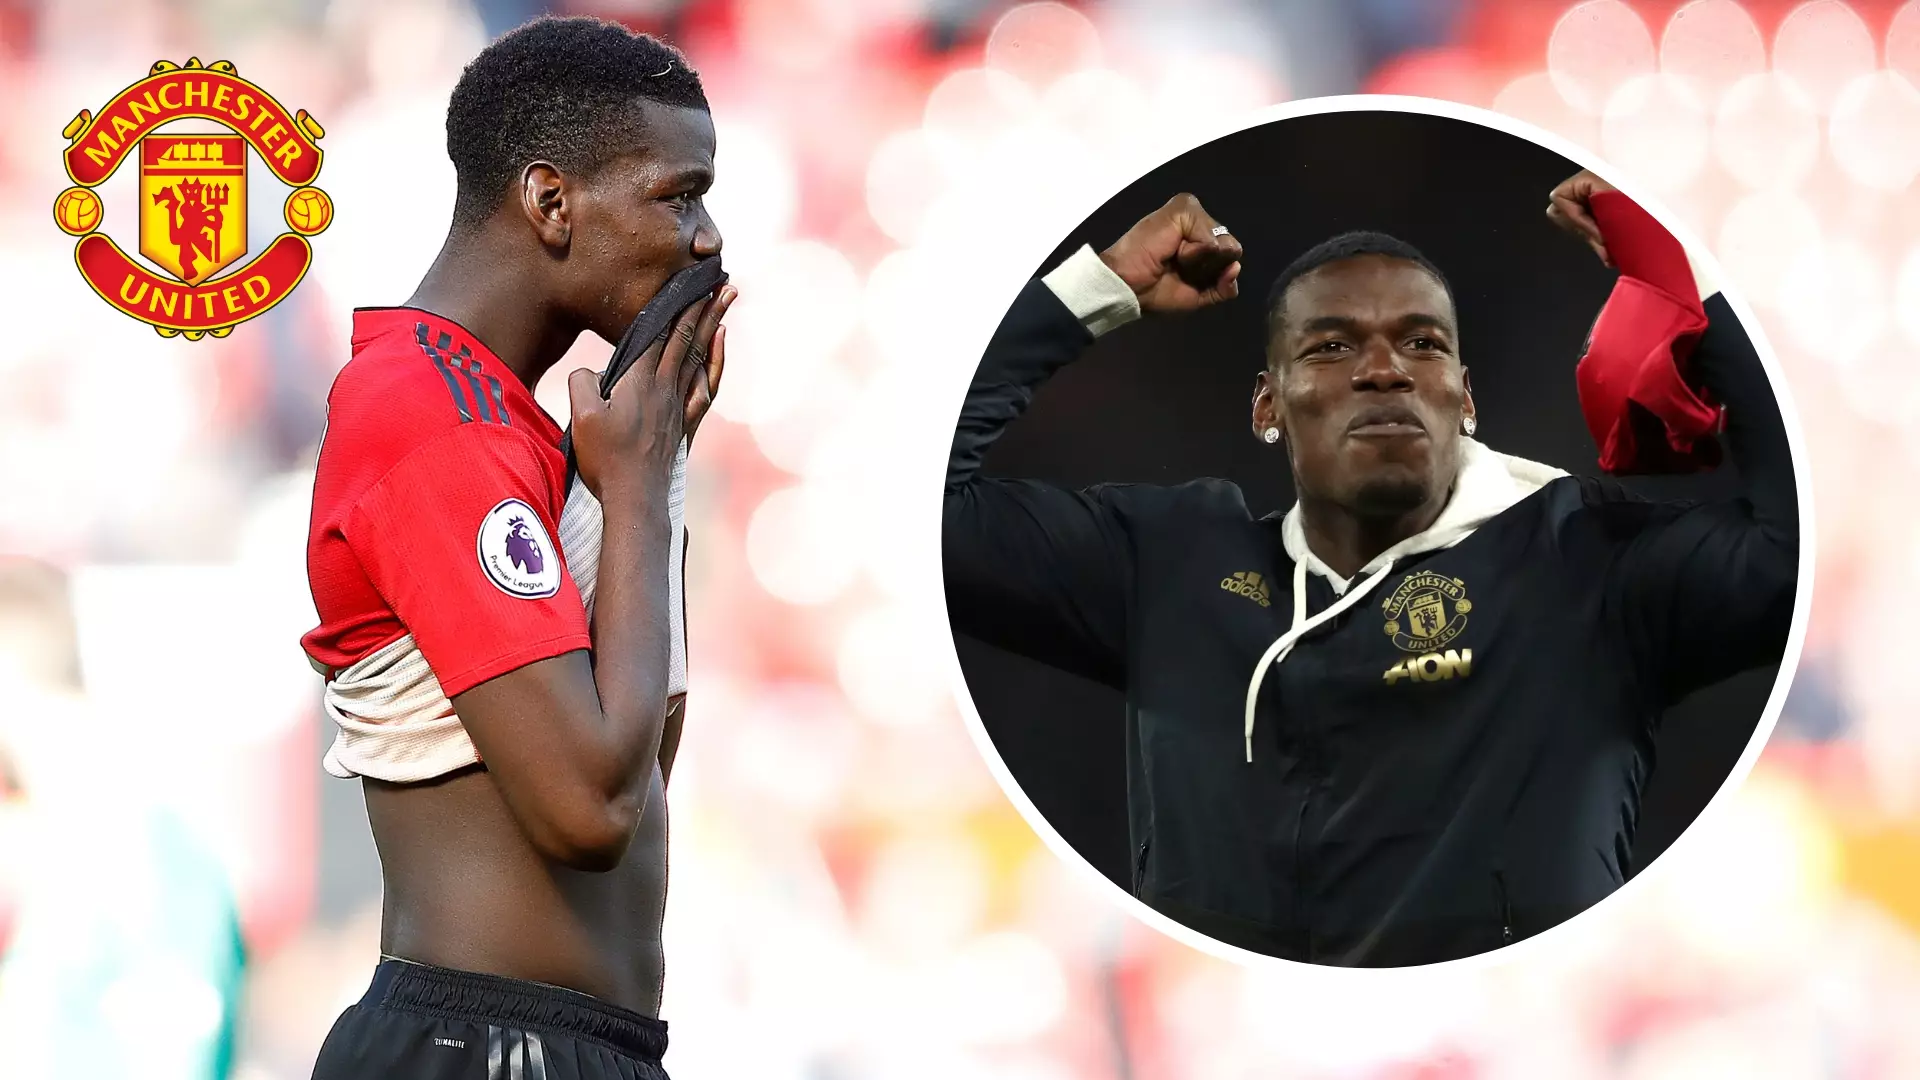 Paul Pogba’s Stats Show Why Manchester United Should Block His Move To Real Madrid